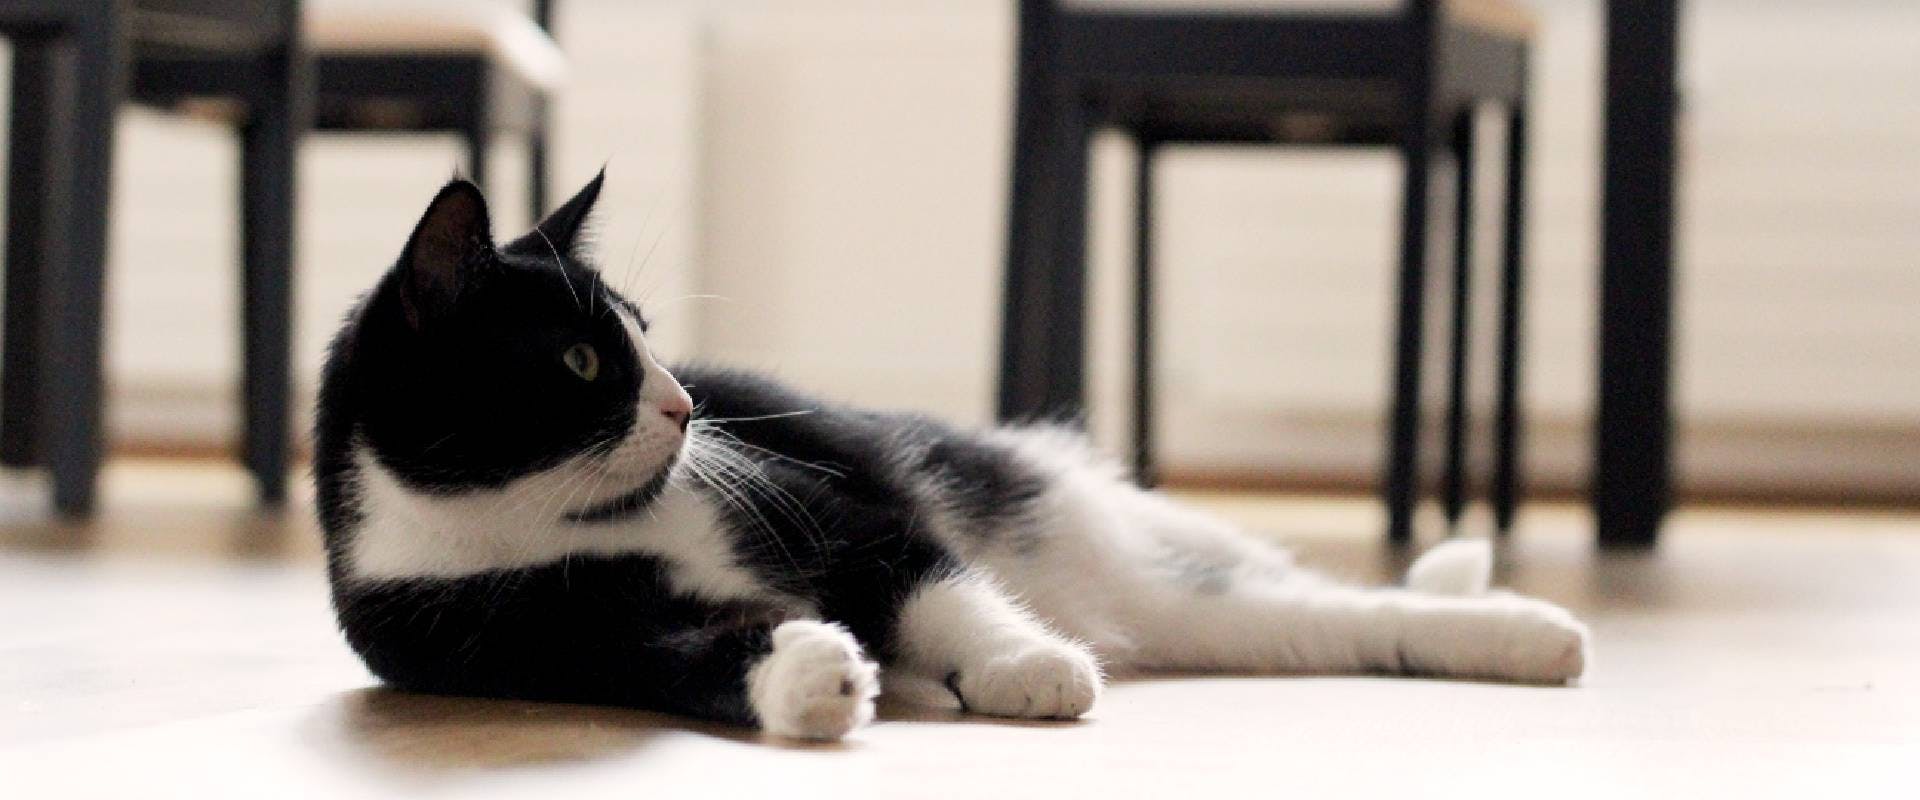 black and white striped cat breeds